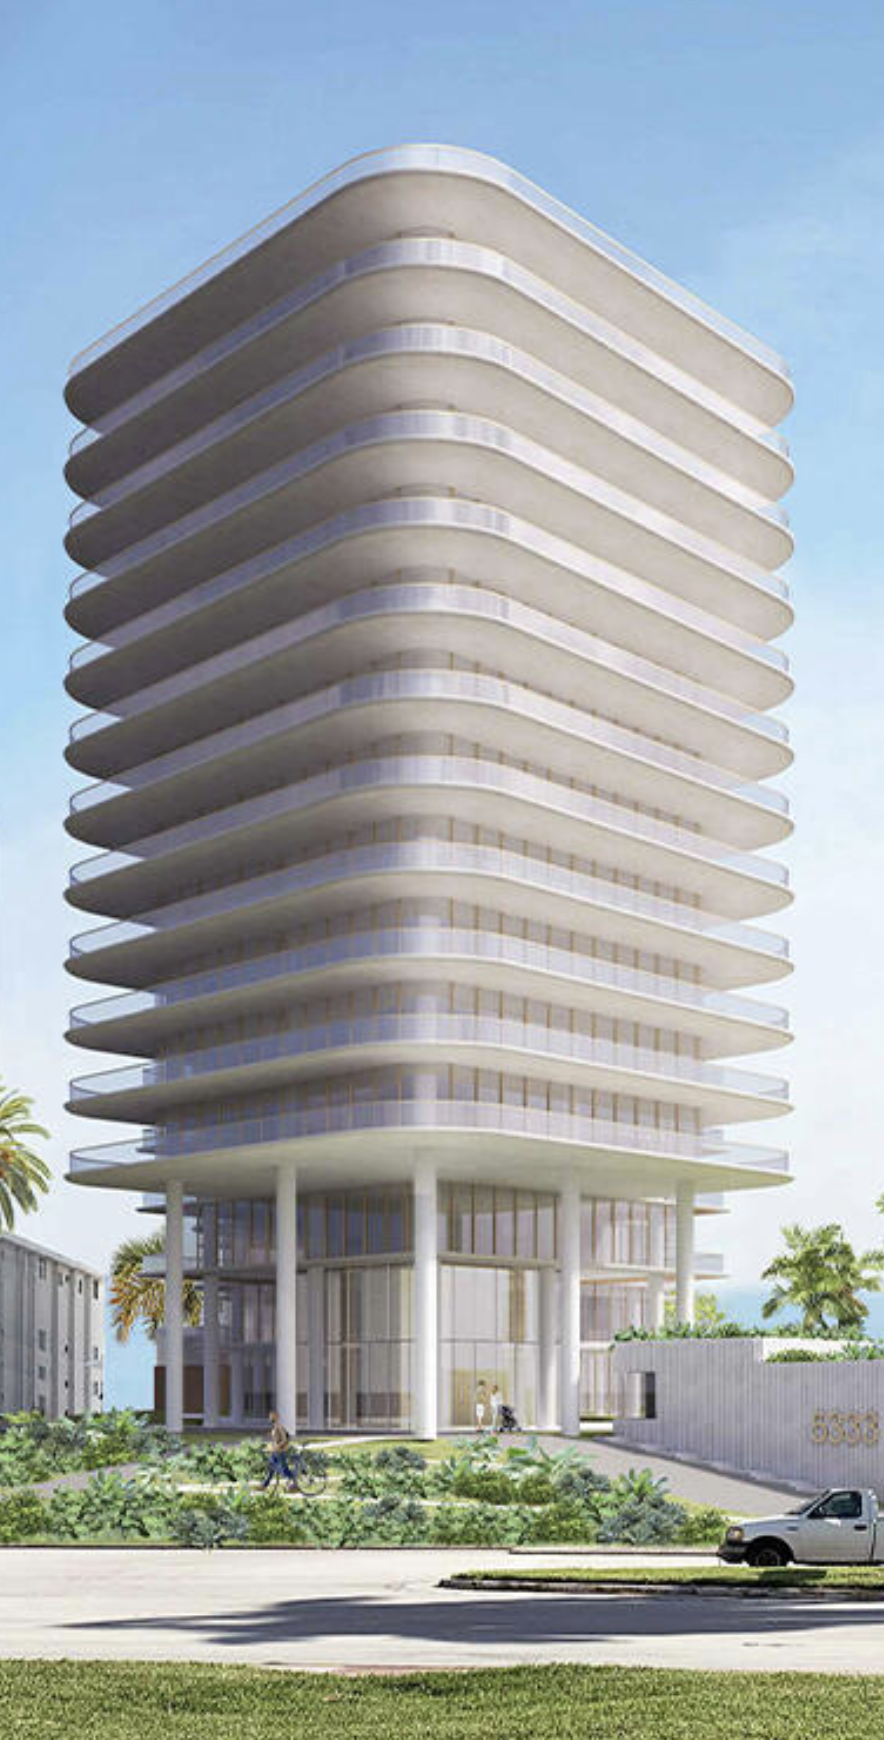 Tentative Rendering of 5333 Collins Avenue. Designed by Rem Koolhaas. Courtesy of Mast Capital.